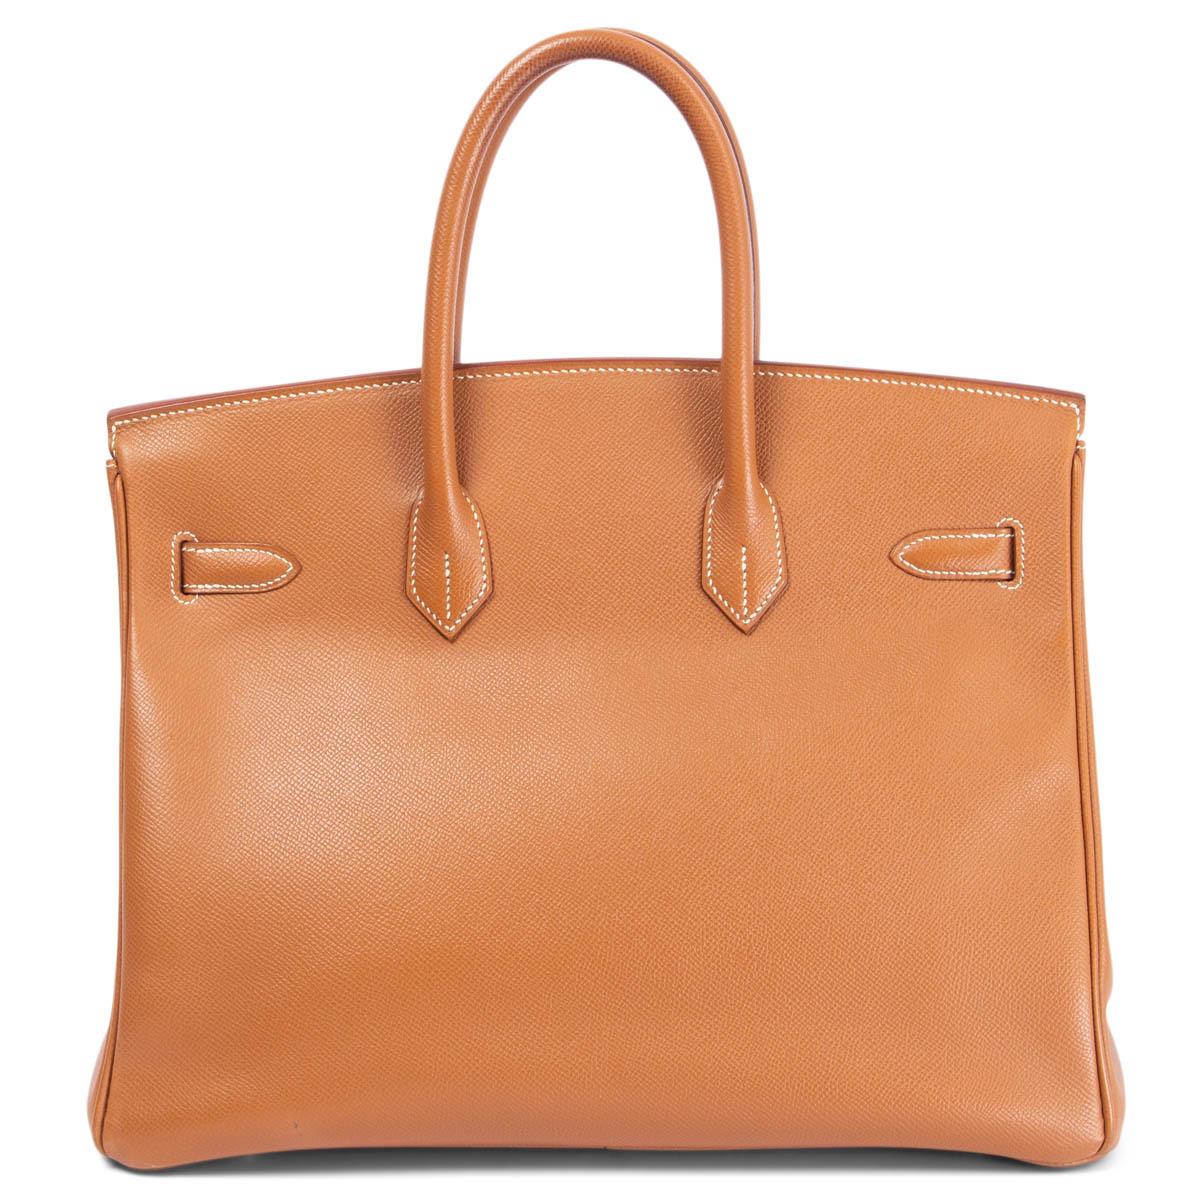 HERMES Gold camel Epsom leather BIRKIN 35 Bag Ghw In Fair Condition For Sale In Zürich, CH